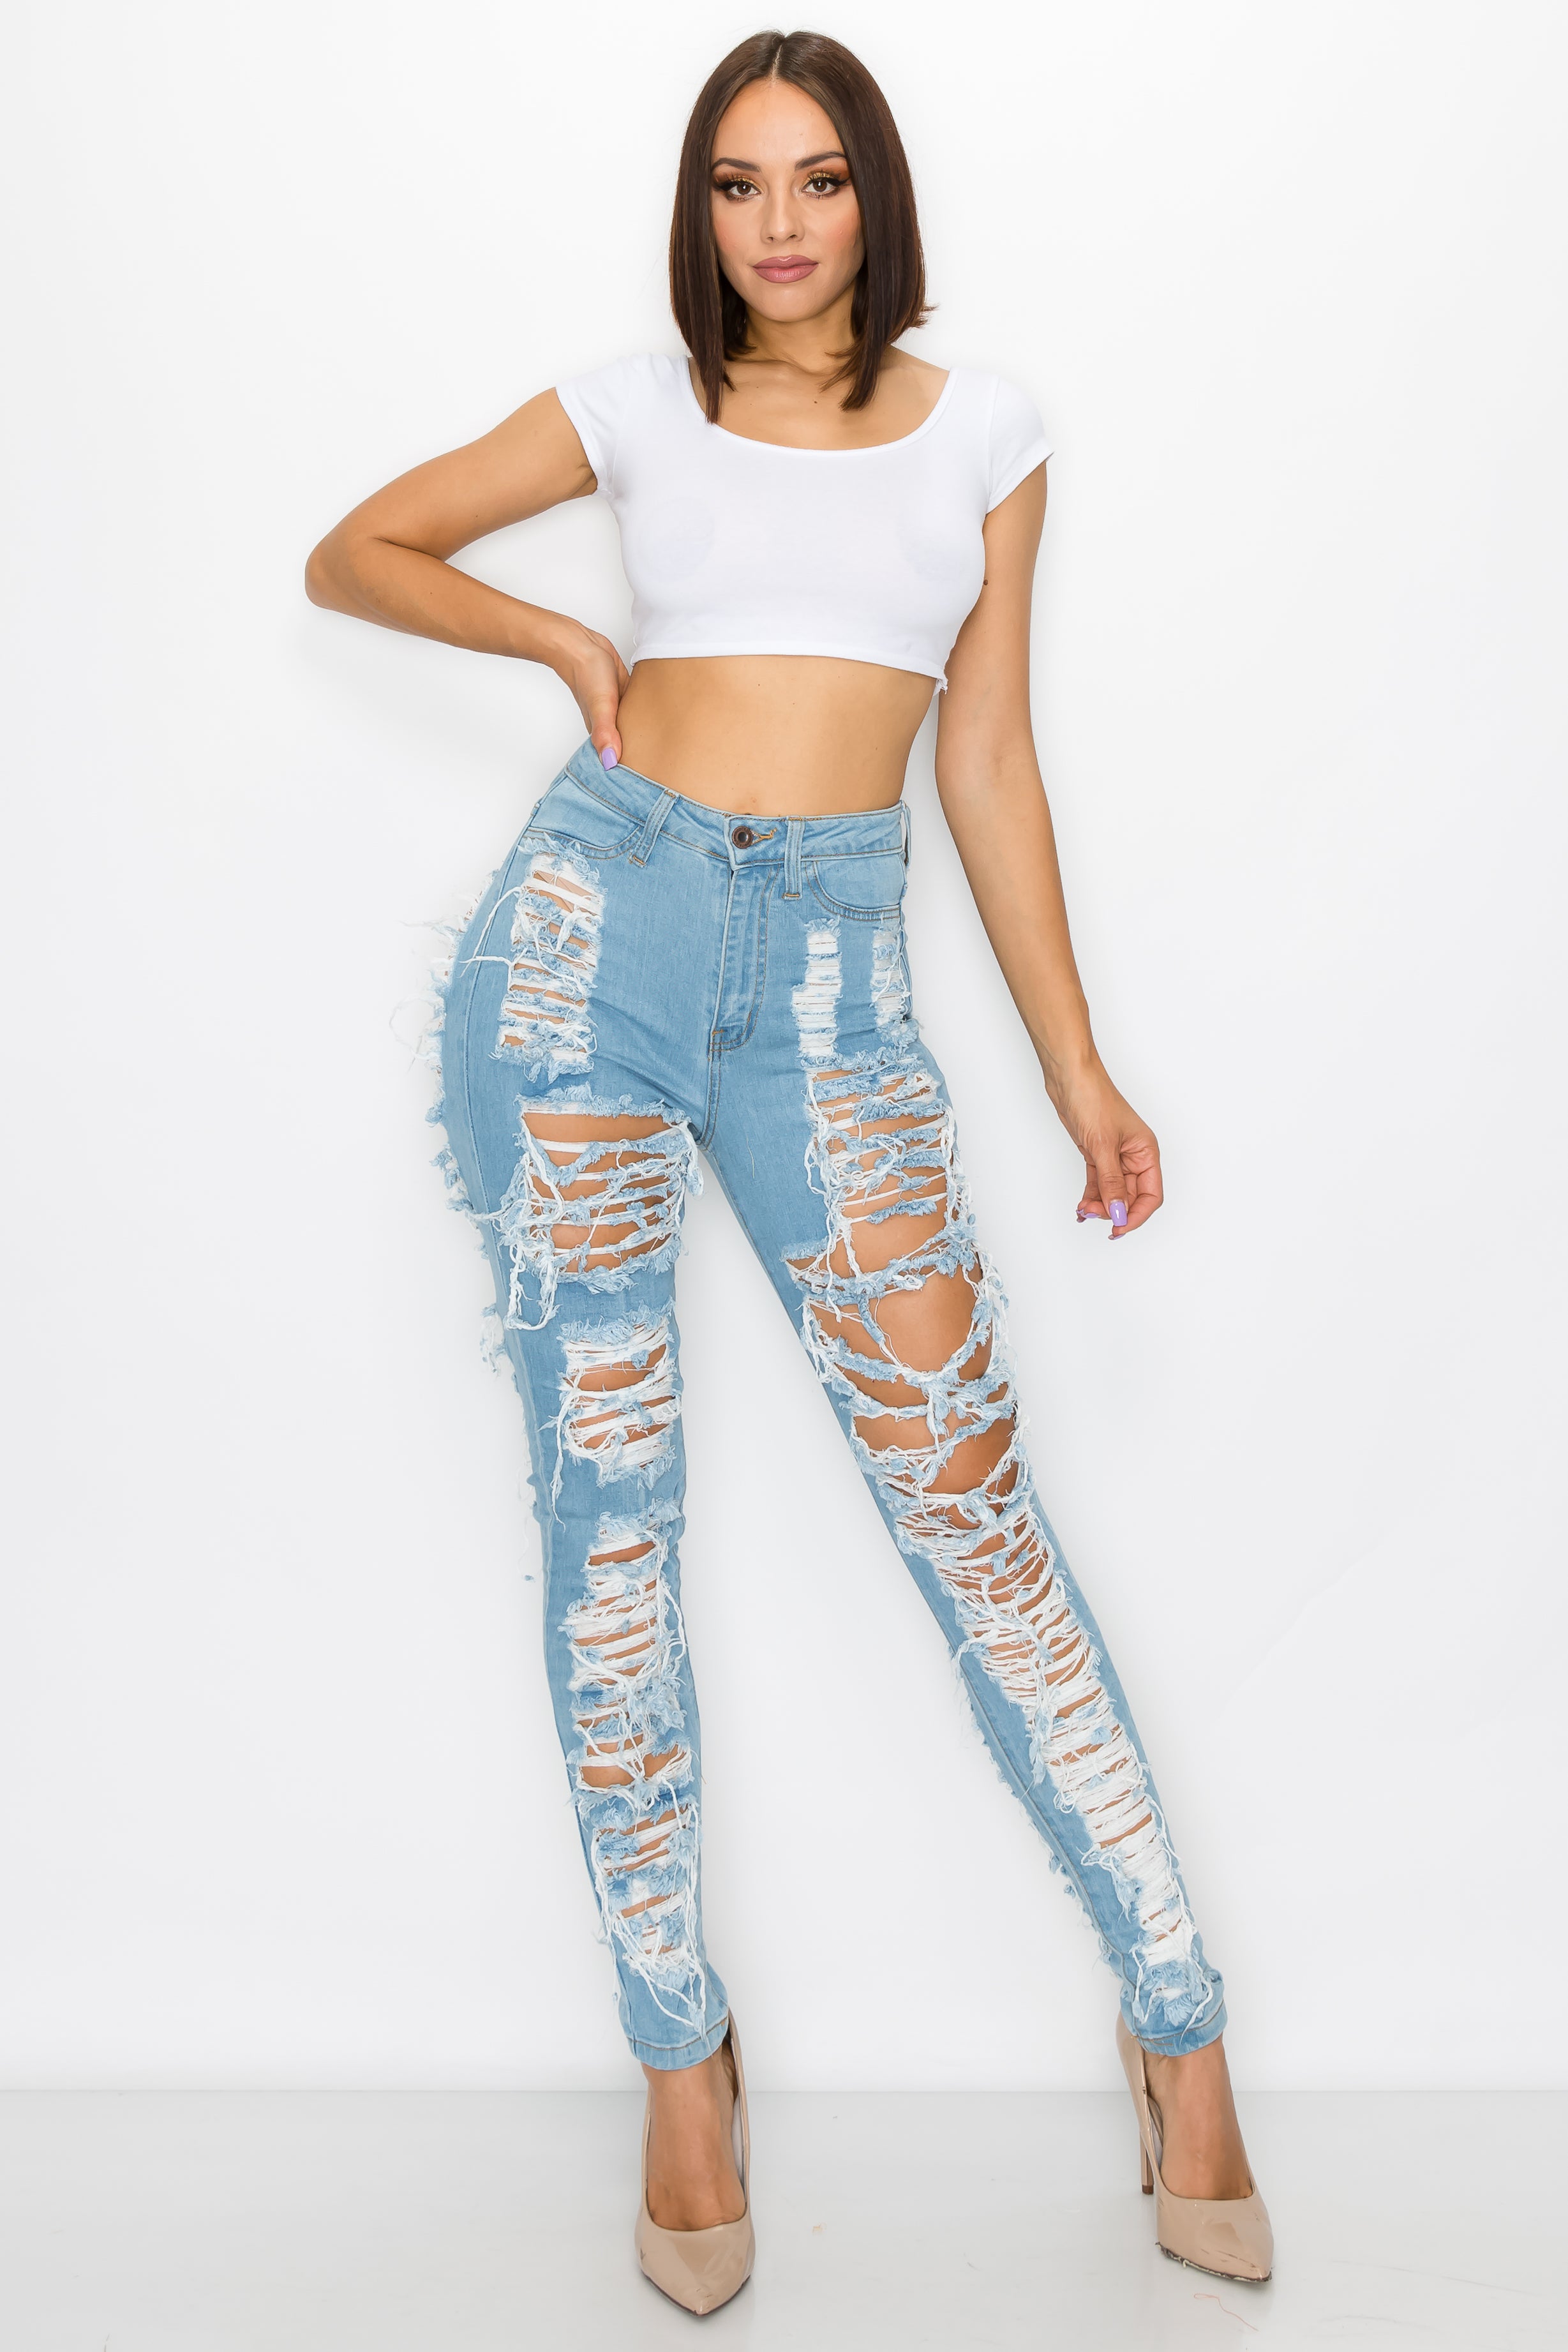 Aphrodite Super High Waisted Distressed Skinny Jeans with Cut Outs –  Aphrodite Jeans